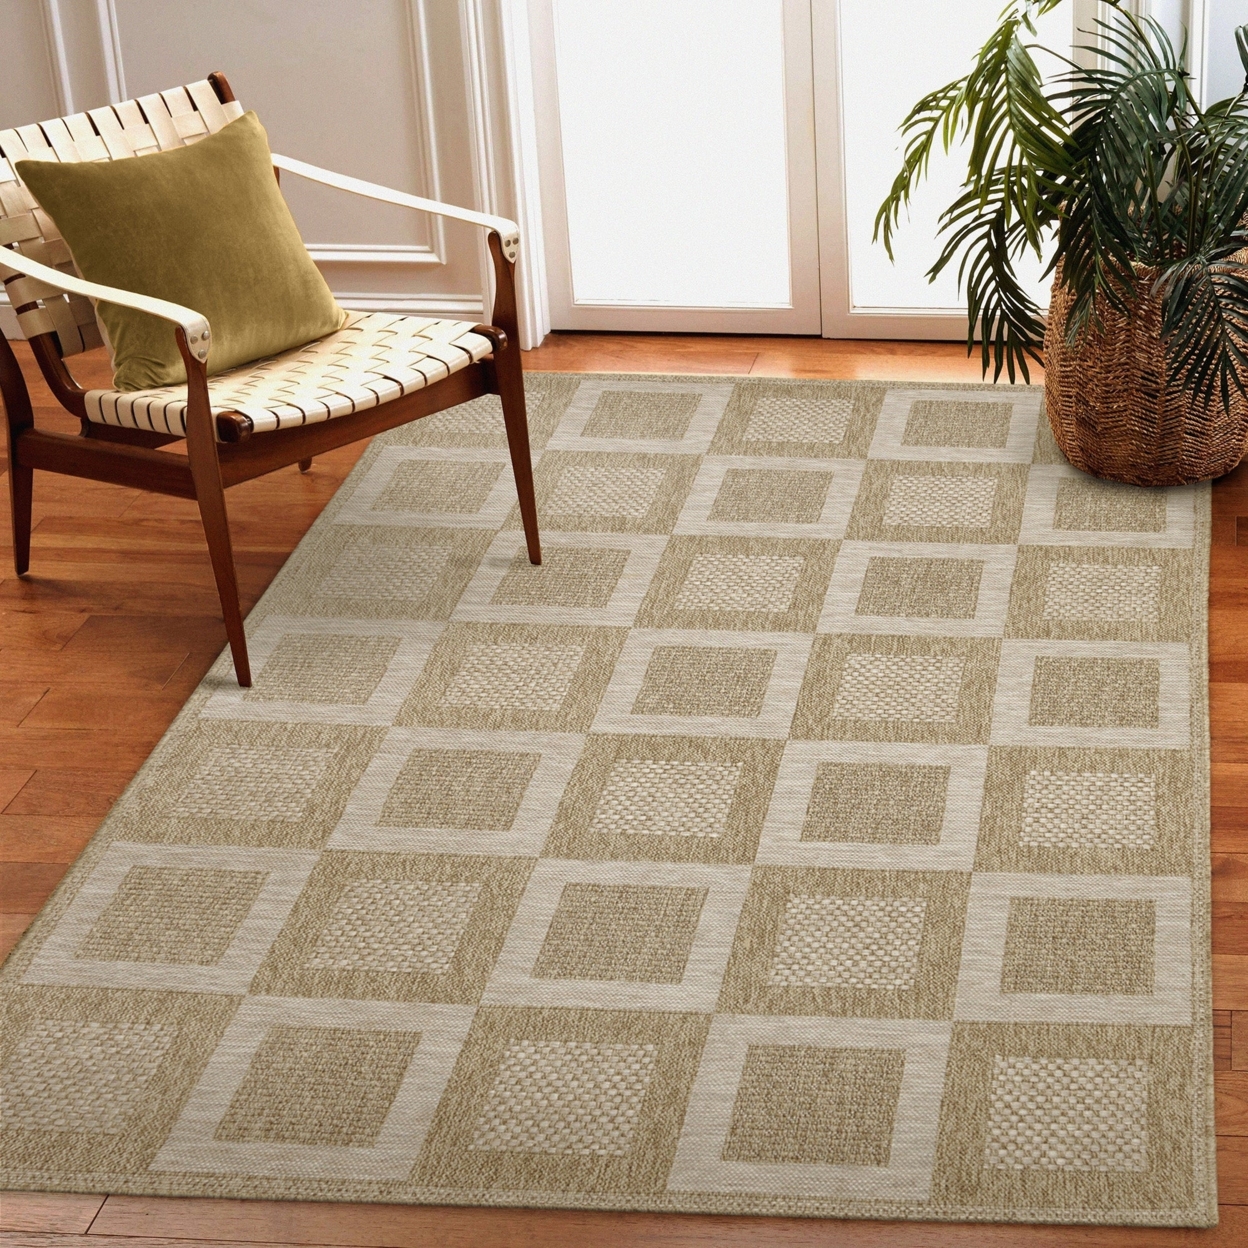 Liora Manne Orly Squares Indoor Outdoor Area Rug Natural - 1'11 X 7'6